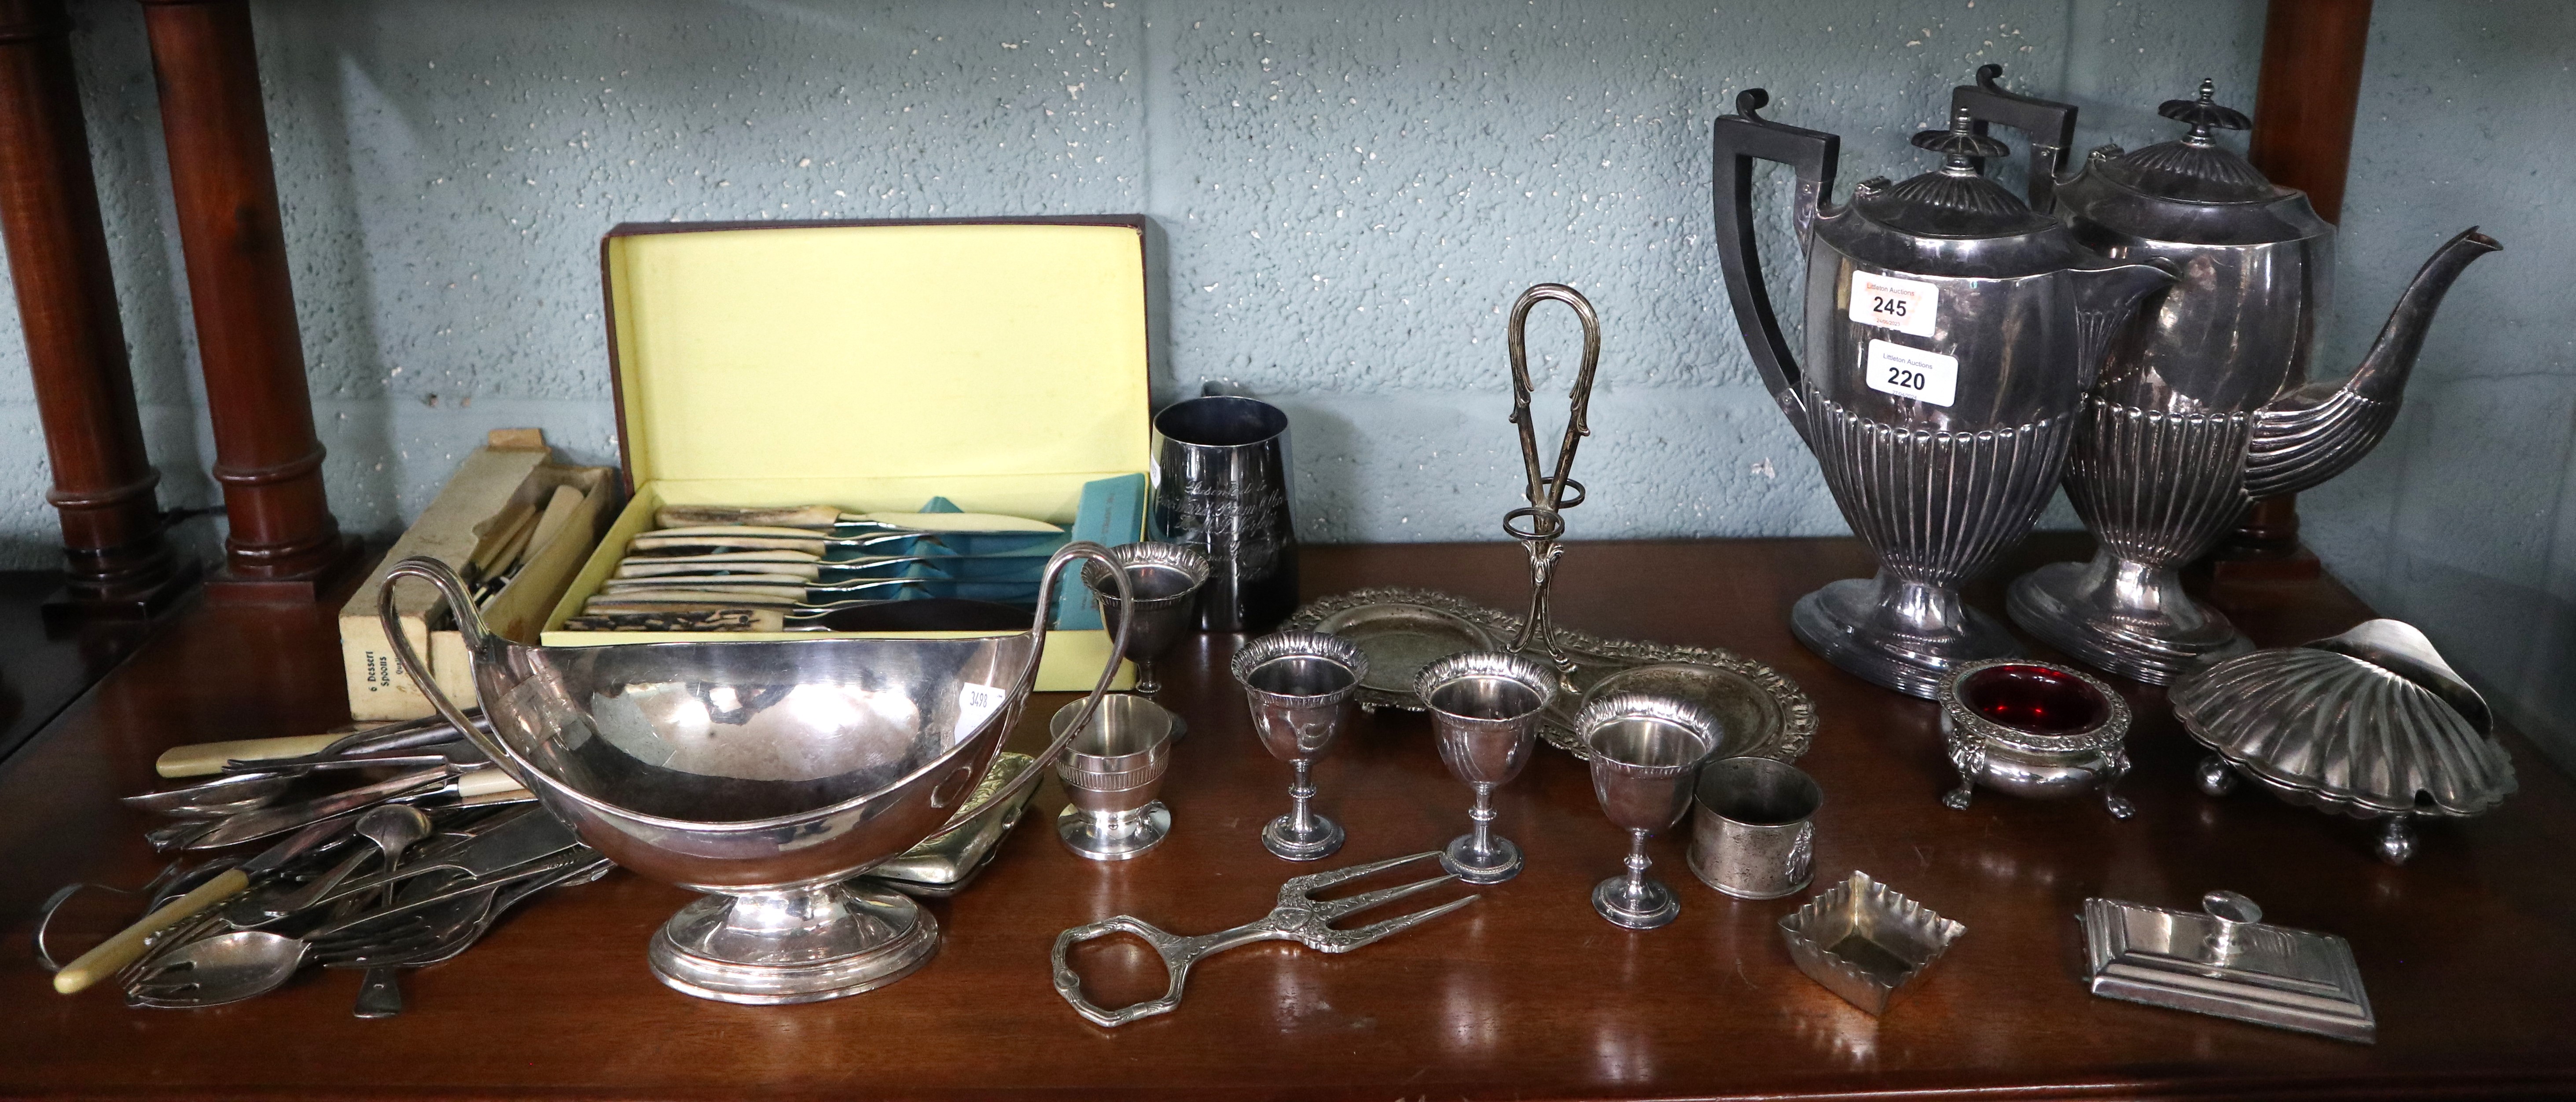 Large collection of silverplate & flatware - Image 3 of 3